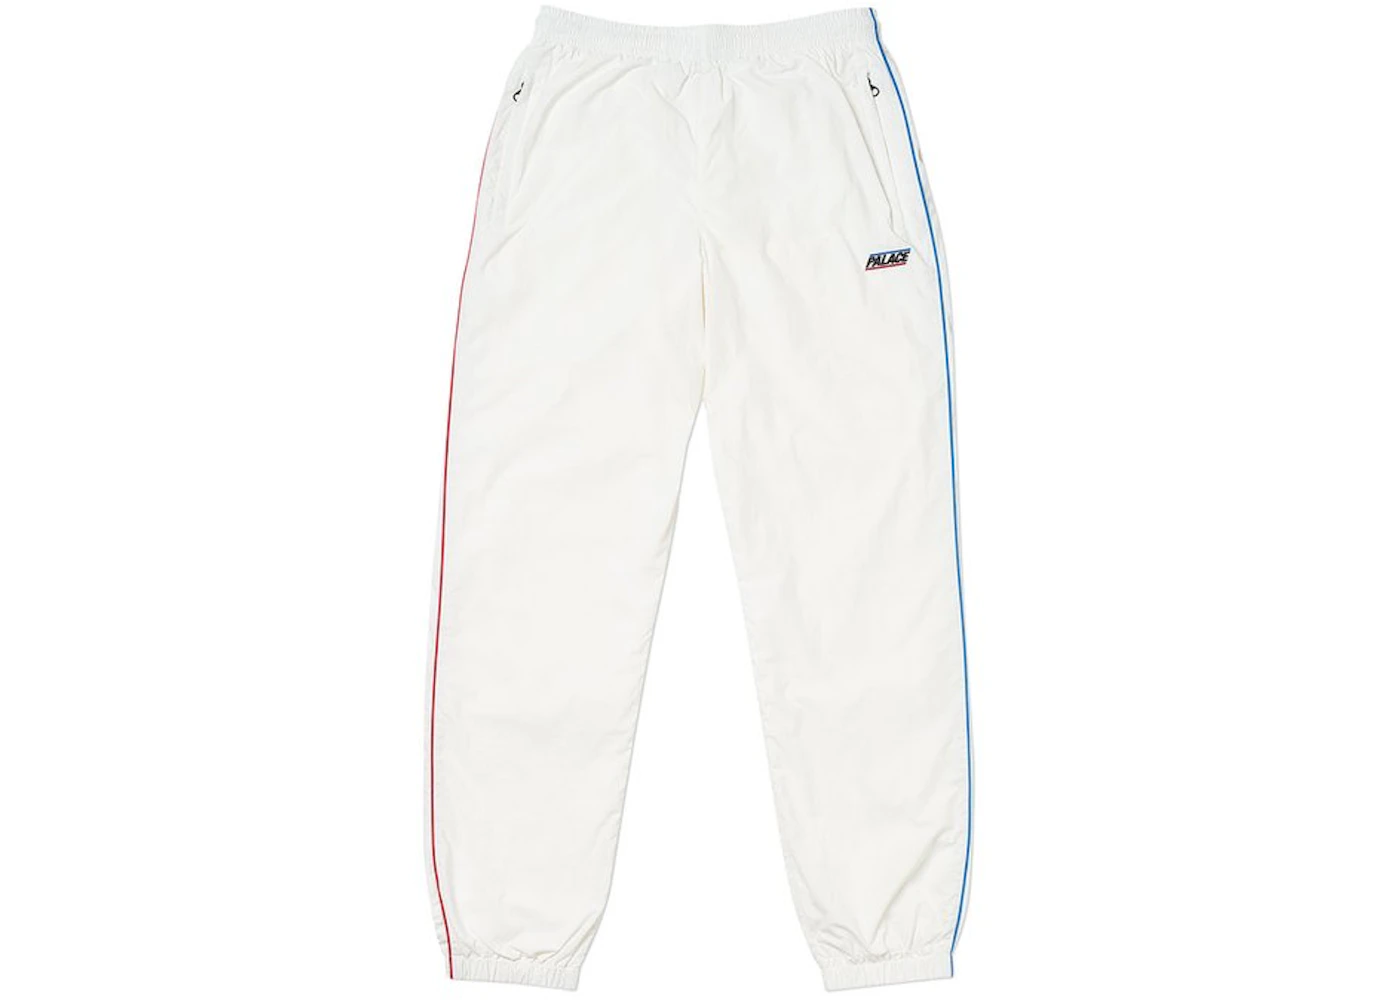 Palace Pipeline Bottoms Bottoms White Men's - SS20 - US